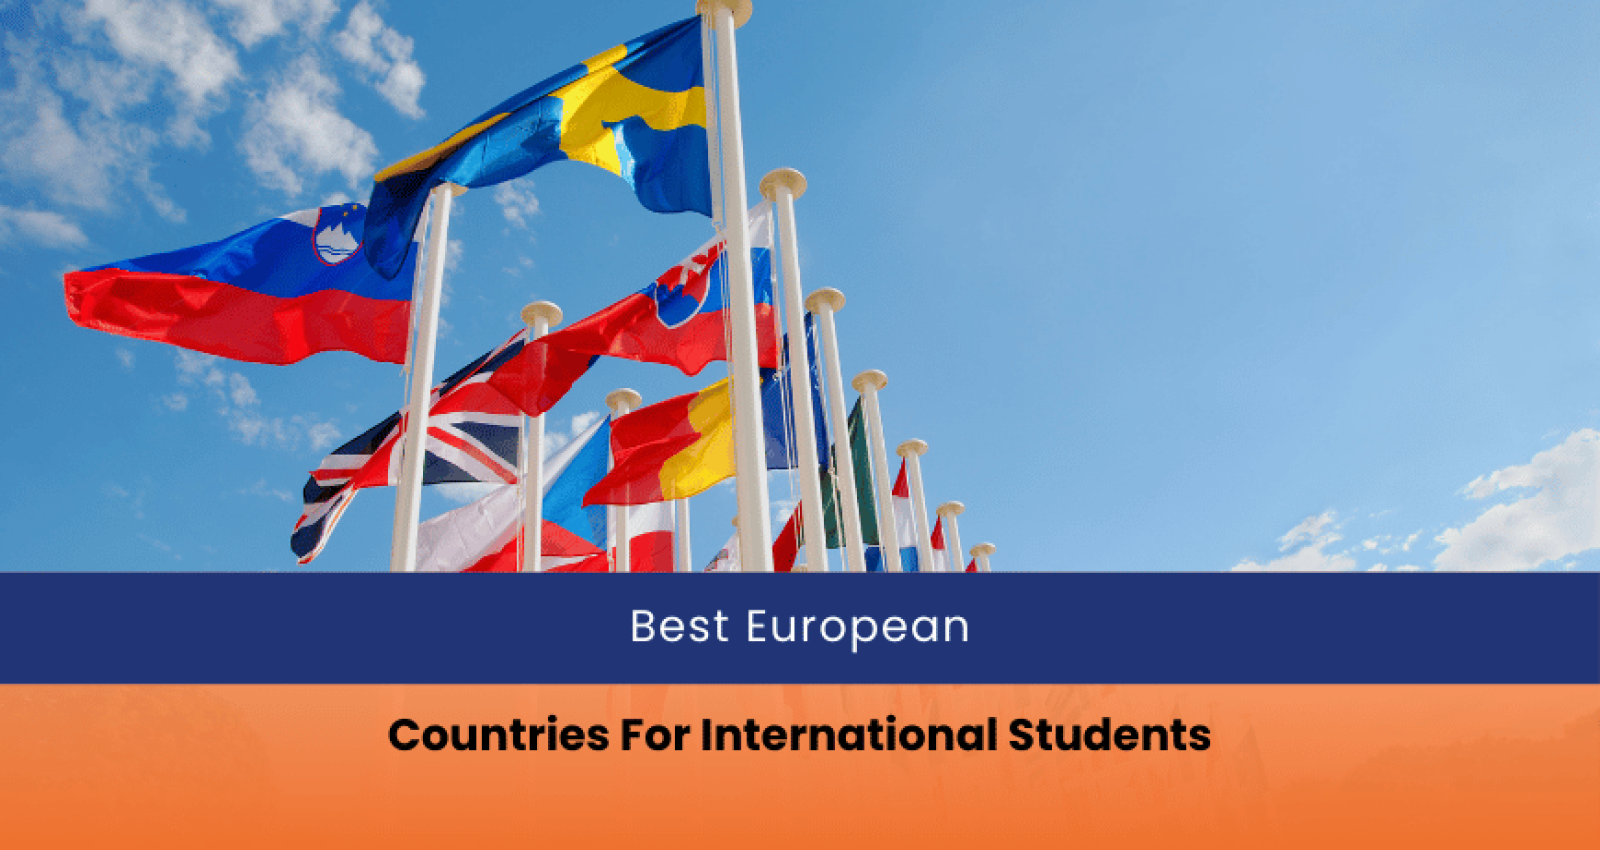 Best European Countries for International Students